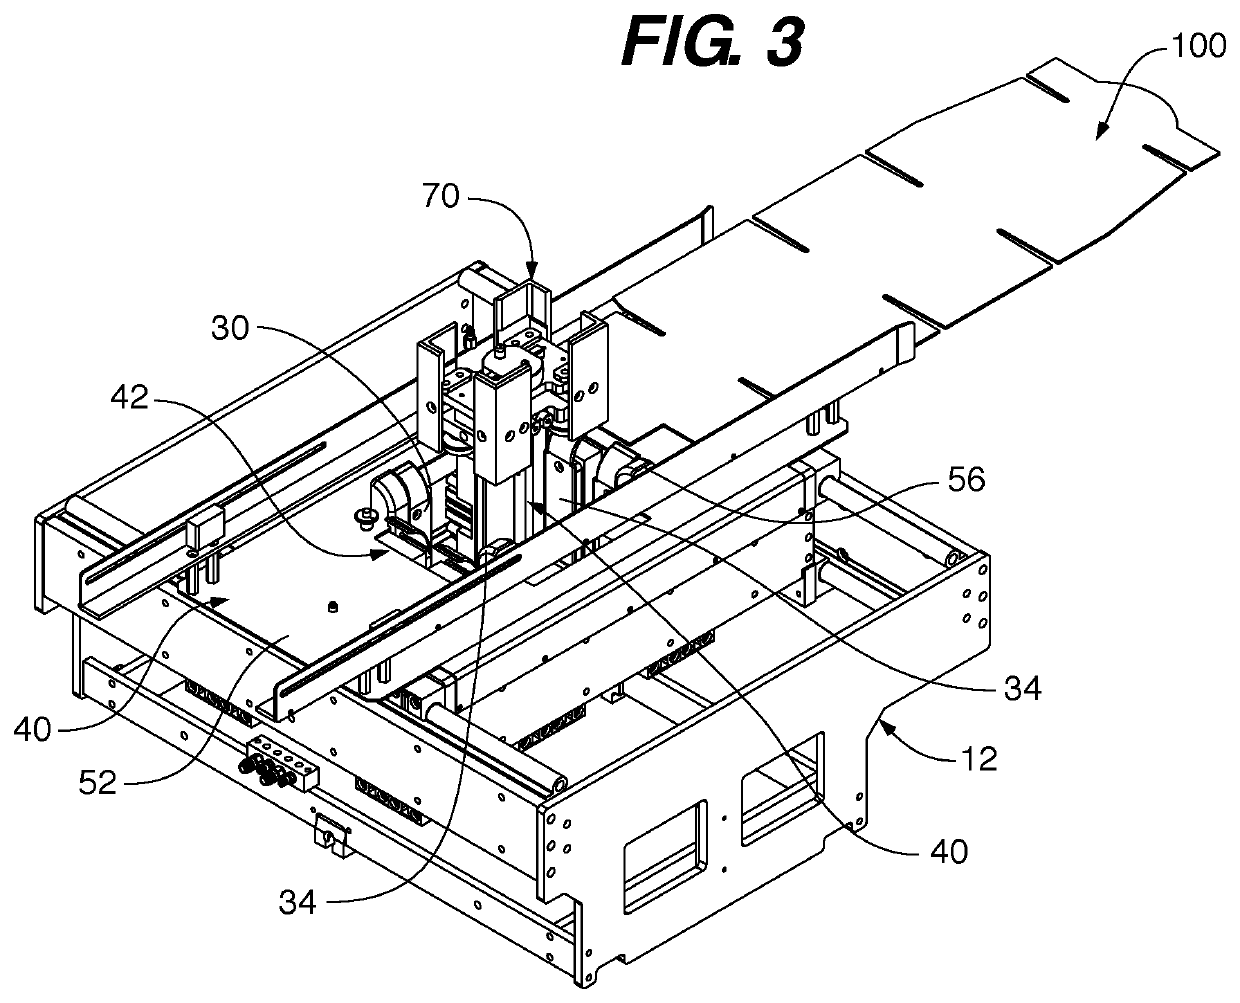 Adaptable tooling methods, system and apparatuses